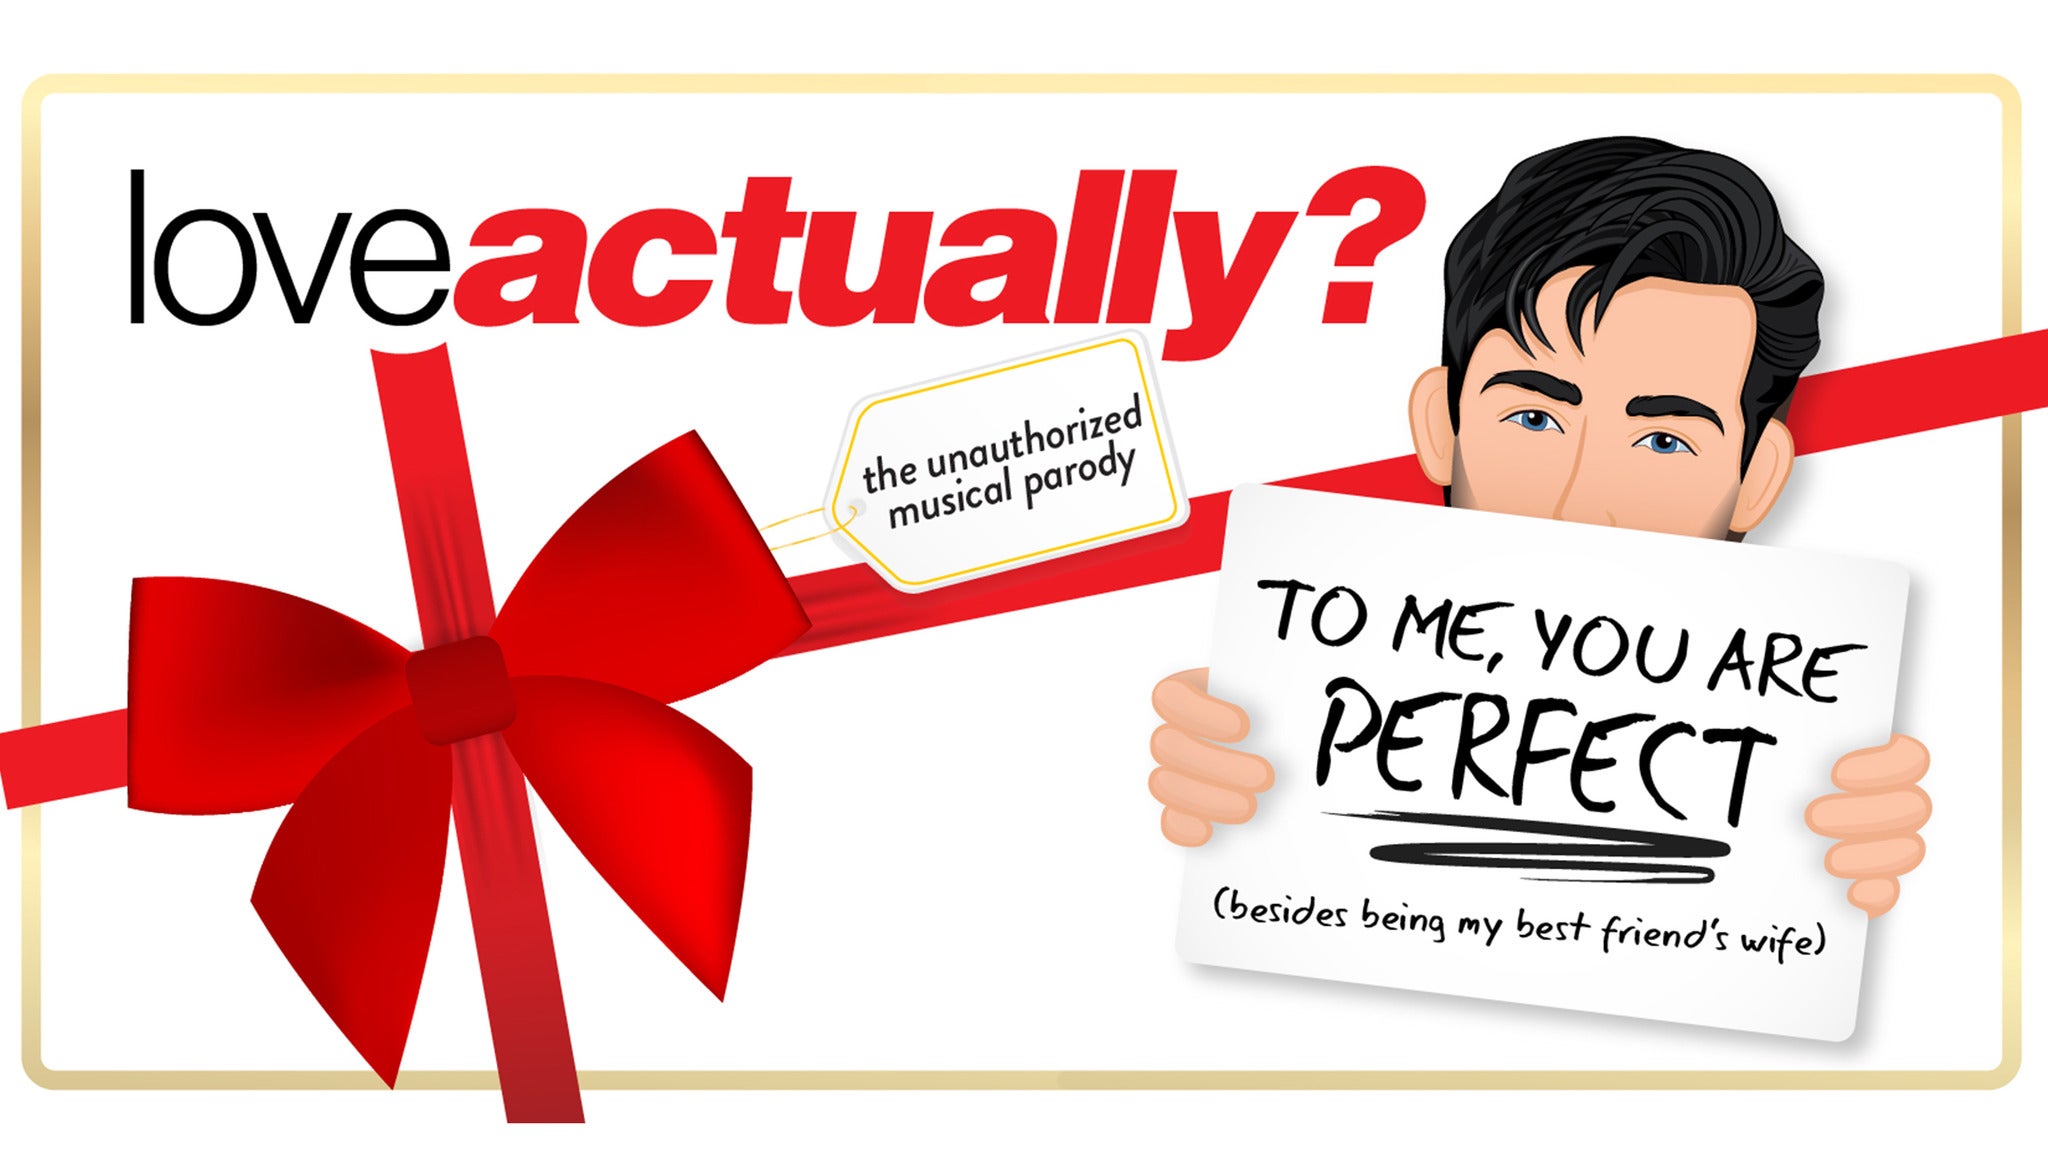 Love Actually The Unauthorized Musical Parody in Chicago promo photo for Apollo List presale offer code